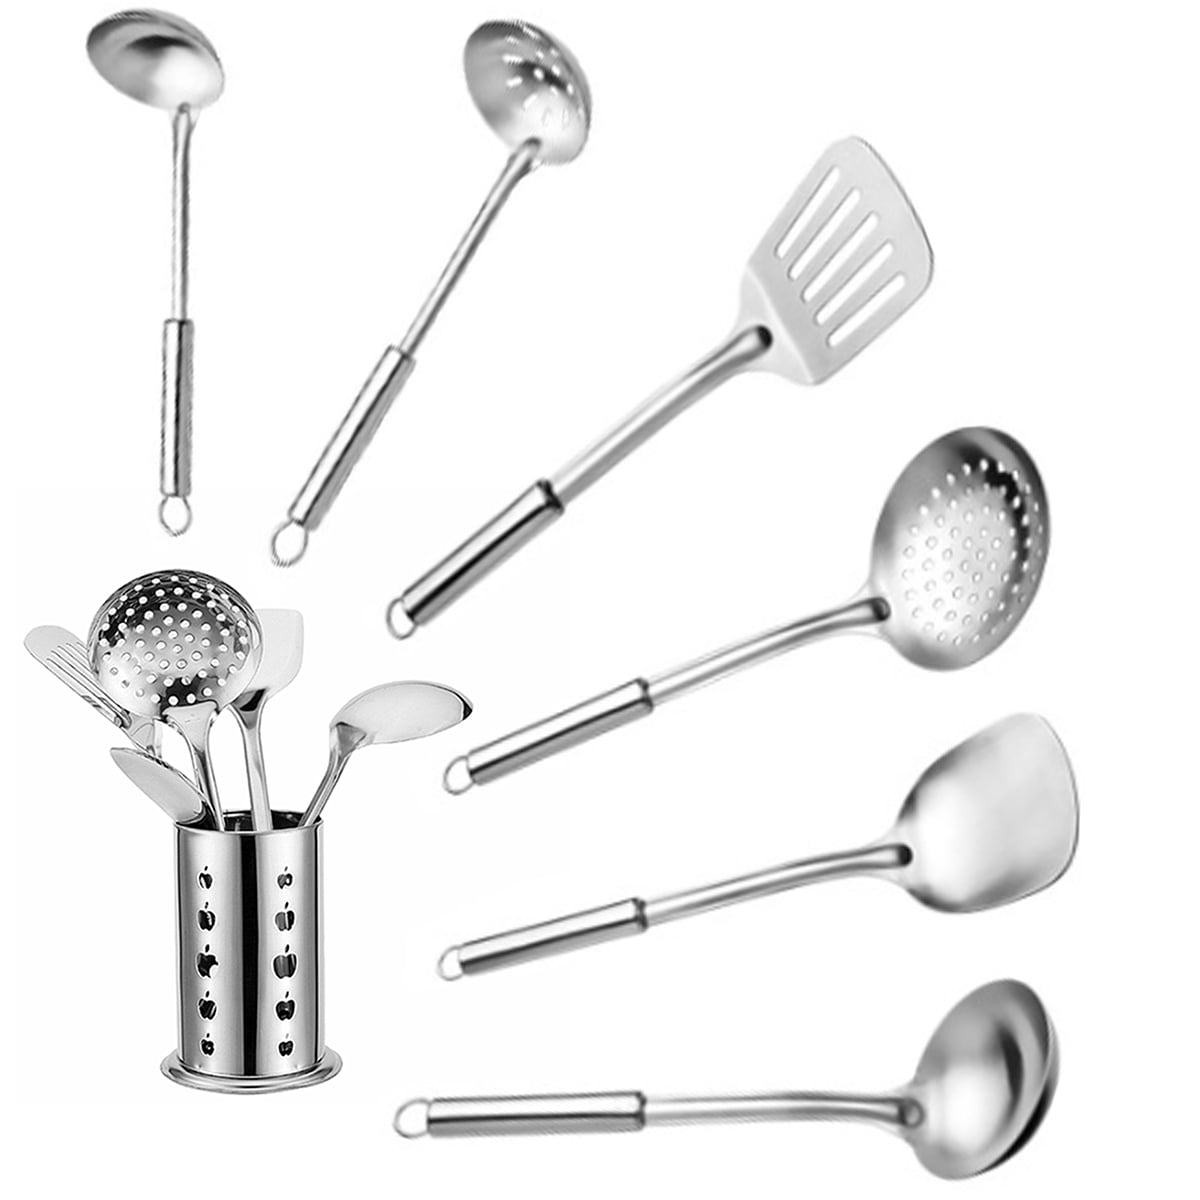 All Clad Stainless Steel Cook & Serve 6-Piece Tool Set